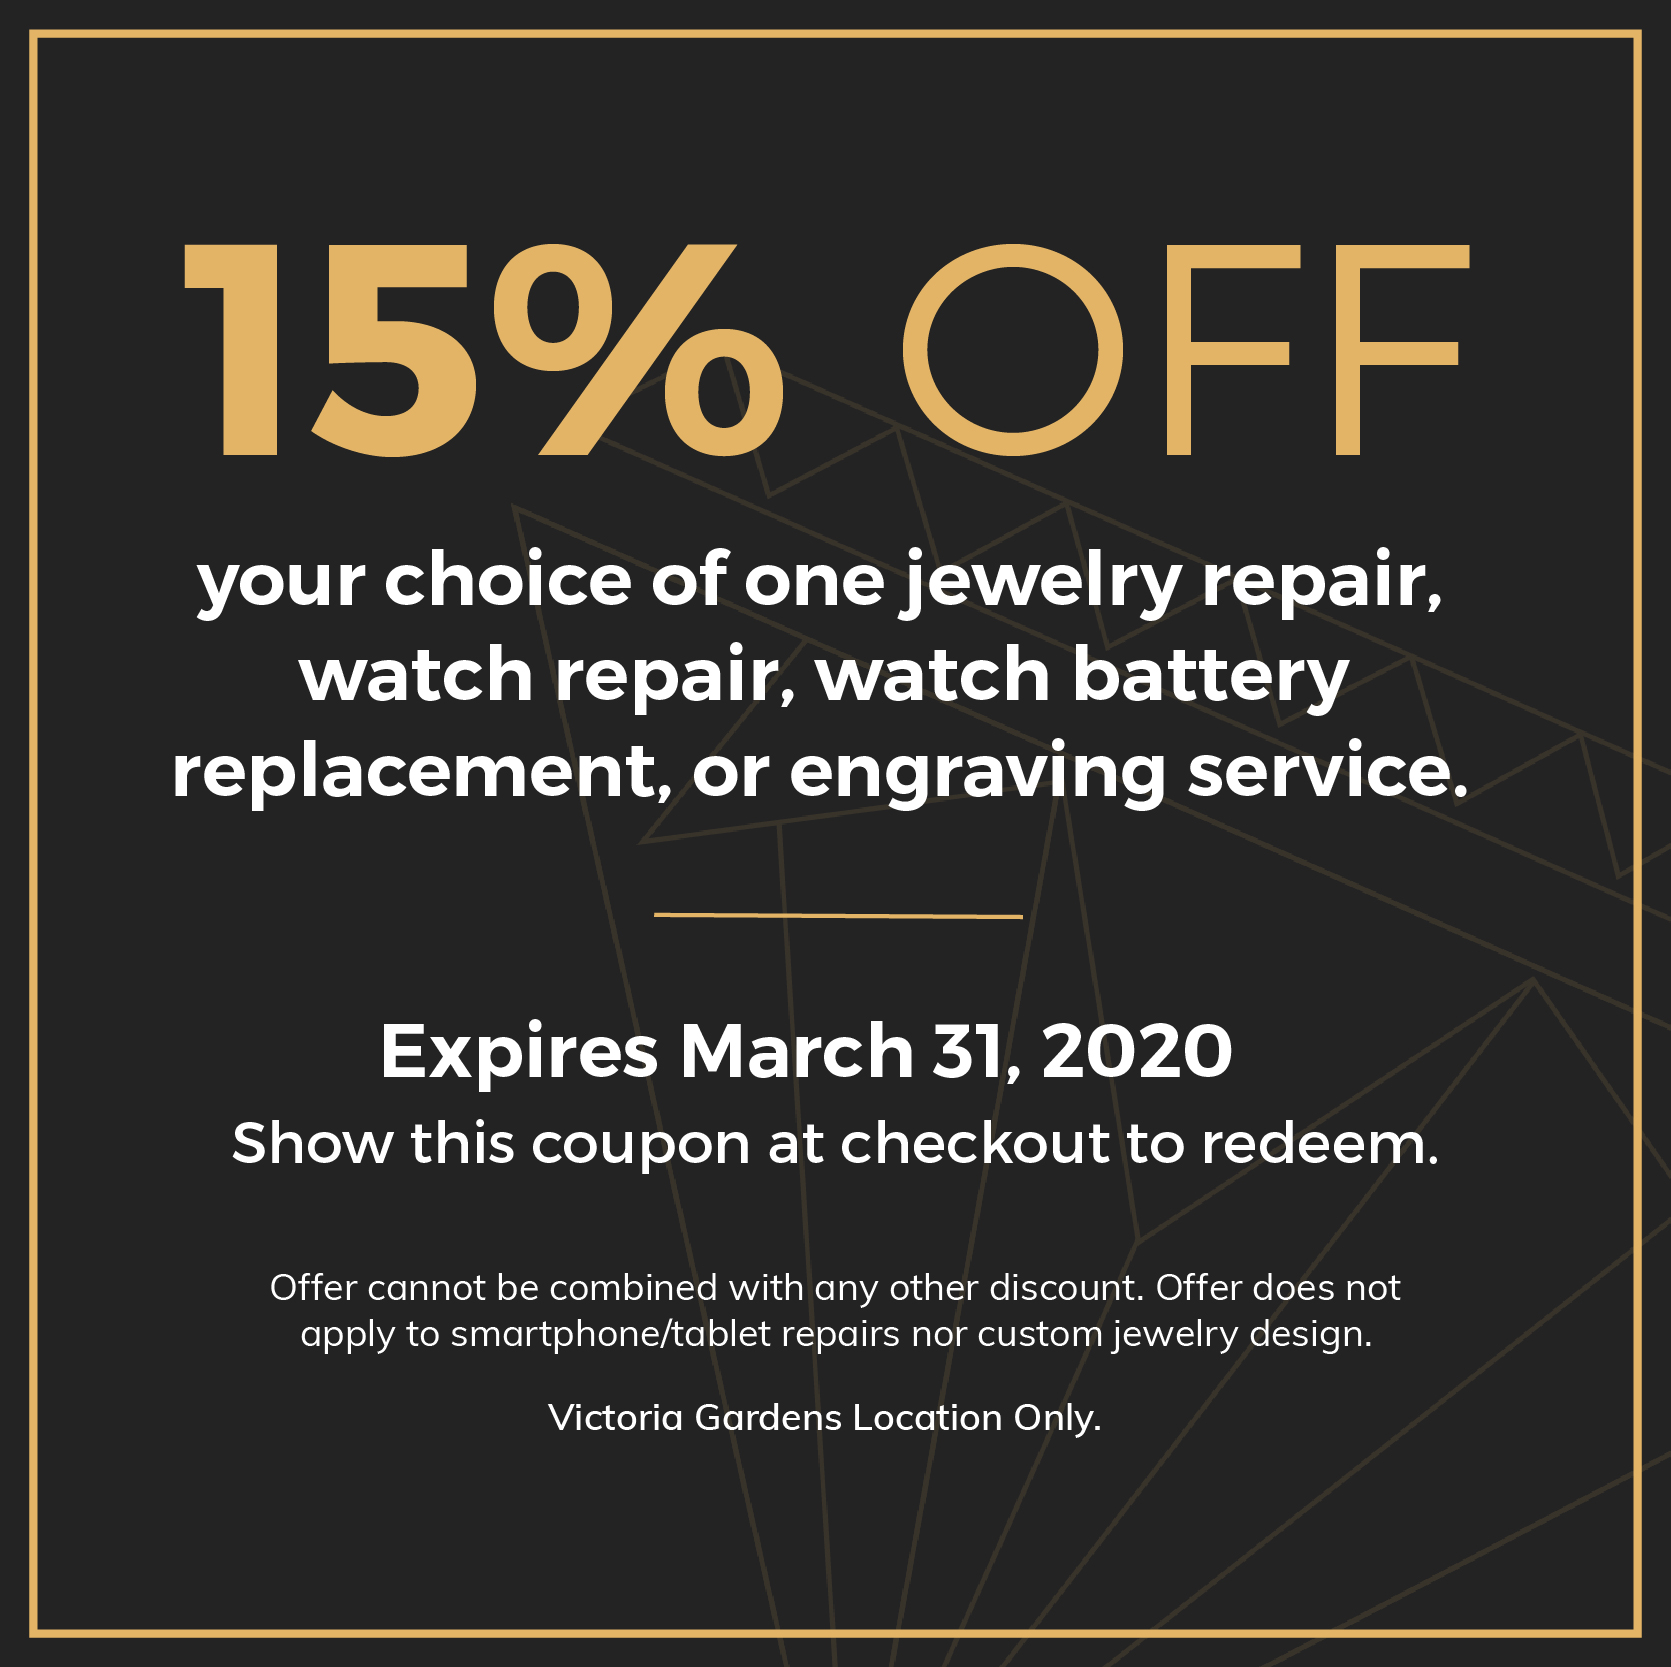 15% OFF. your choice of one jewelry repair, watch repair, watch battery replacement, or engraving service. Expires March 31, 2020. Show this coupon at checkout to redeem. Offer cannot be combined with any other discount. Offer does not apply to smartphone/tablet repairs nor custom jewelry design. Victoria Gardens Location Only.